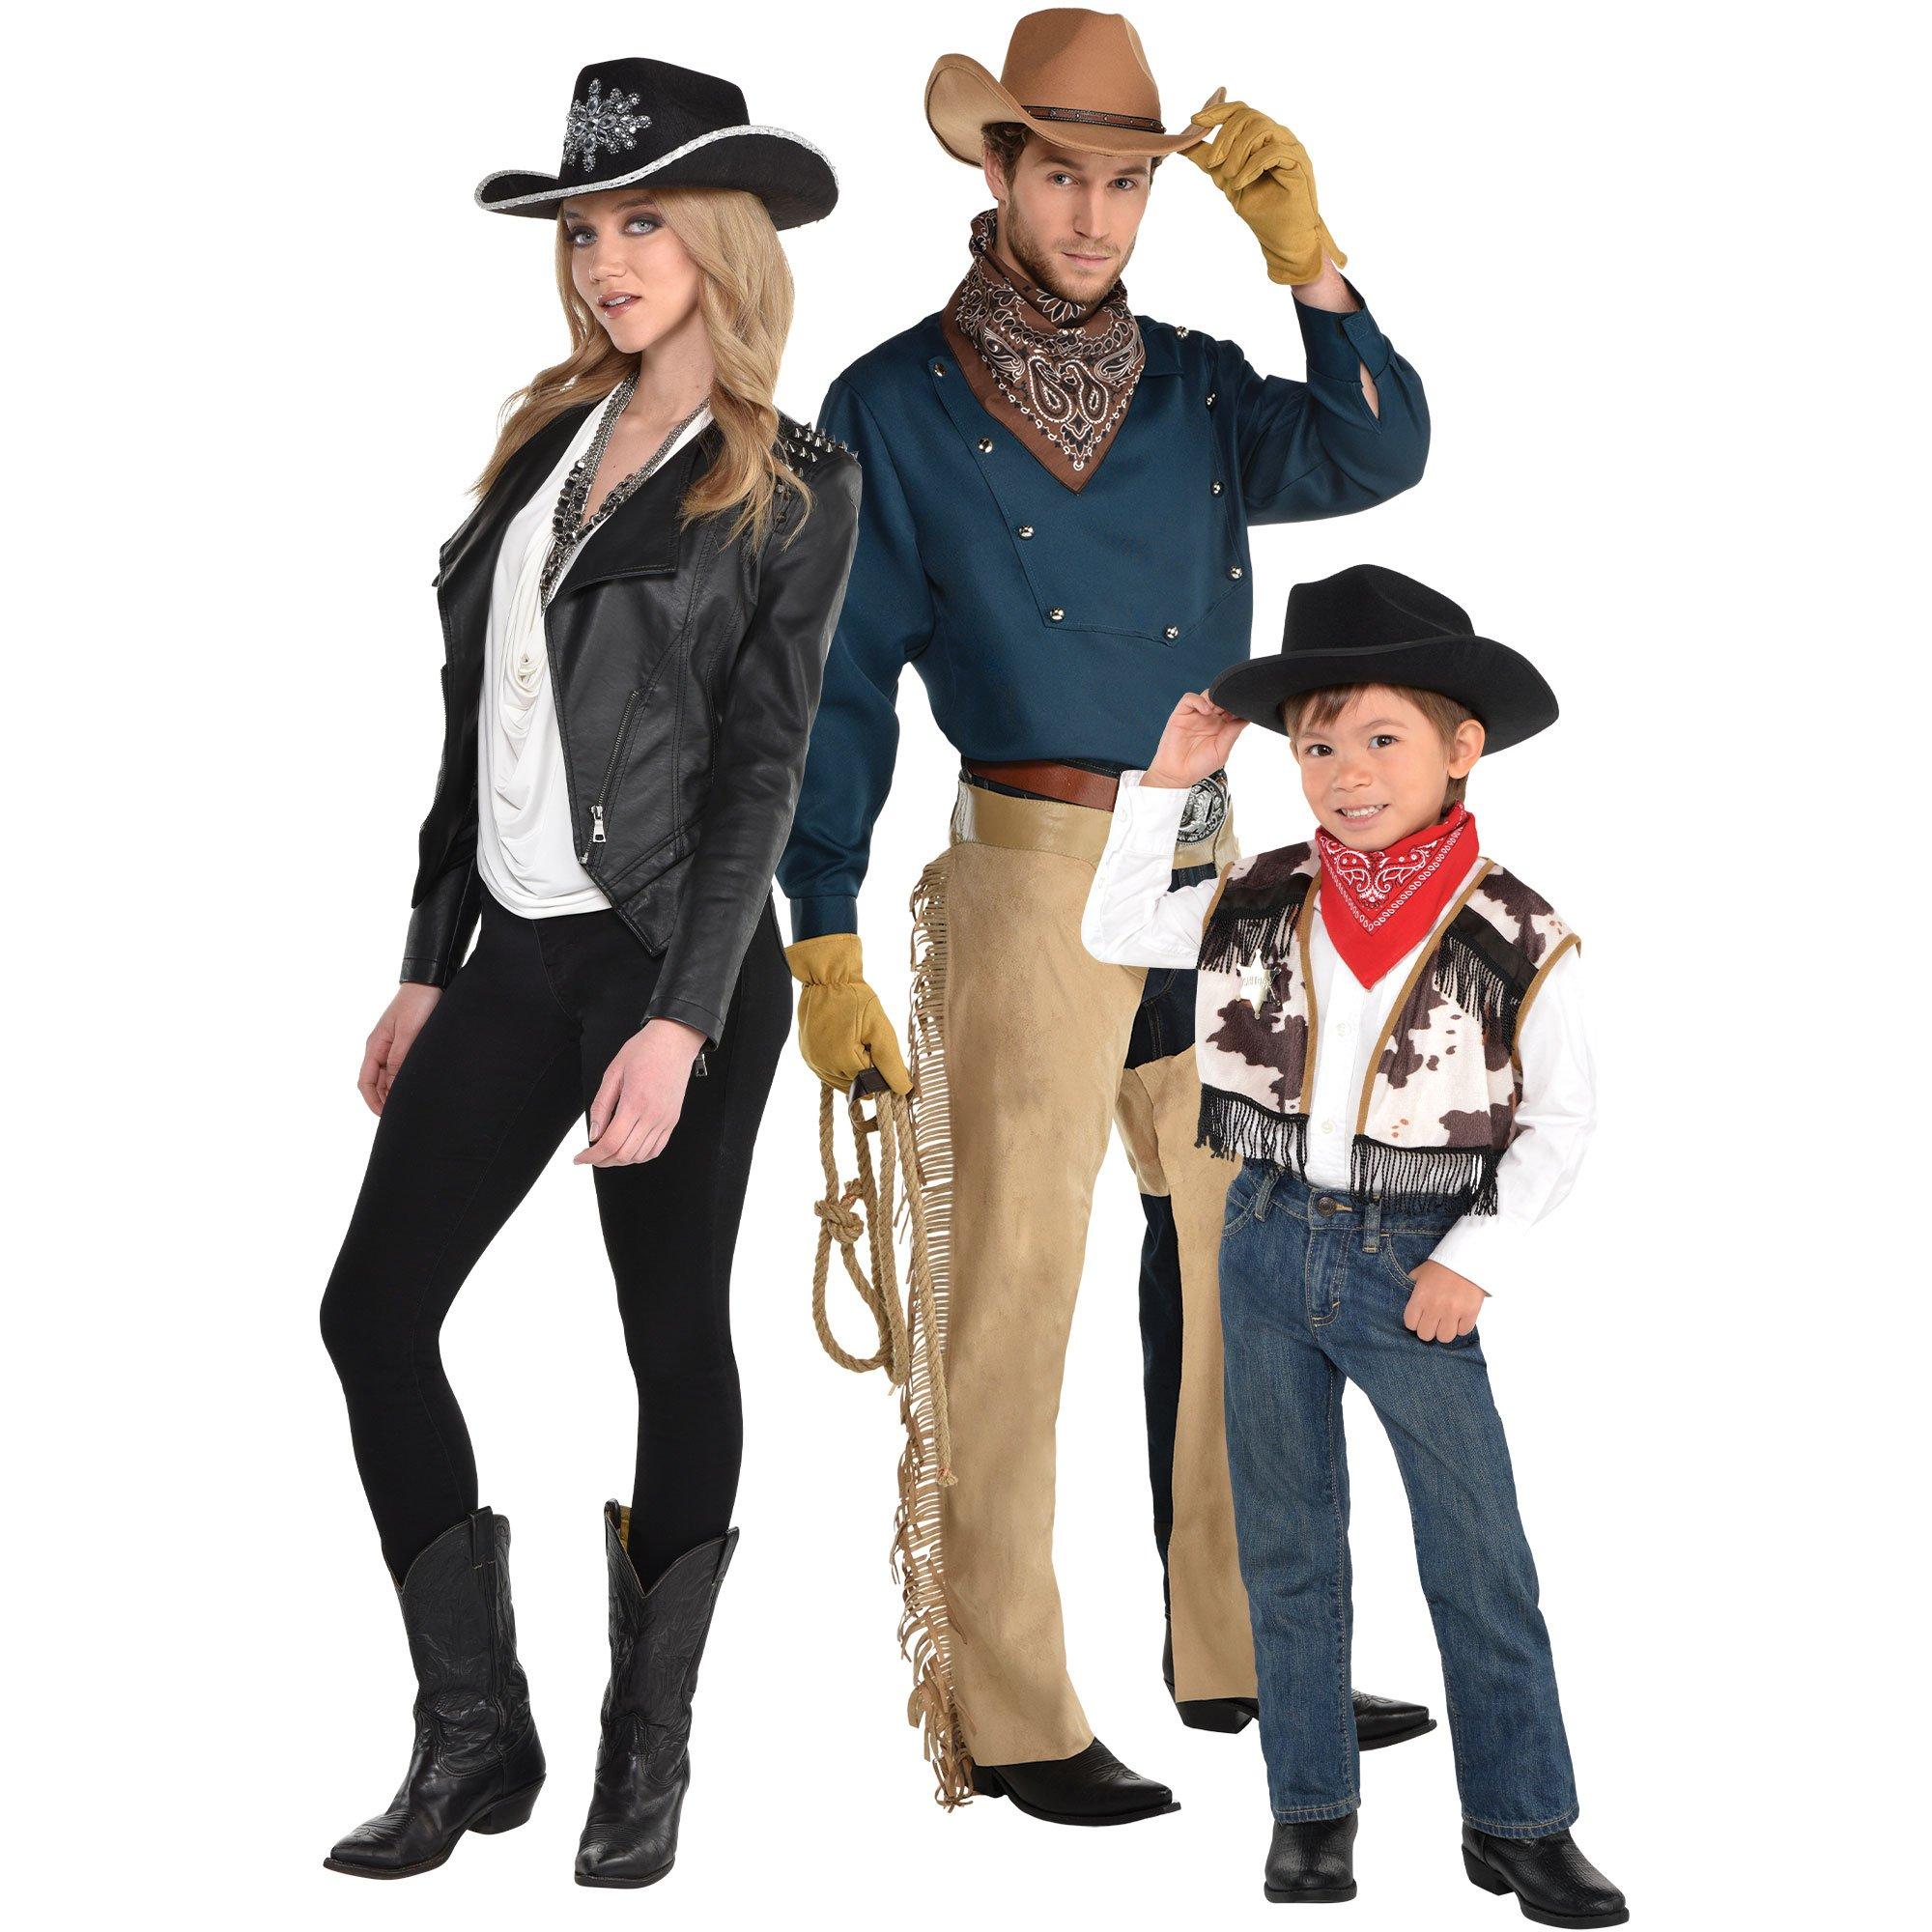 Cowgirl Halloween Costume Accessory Kit, Adult